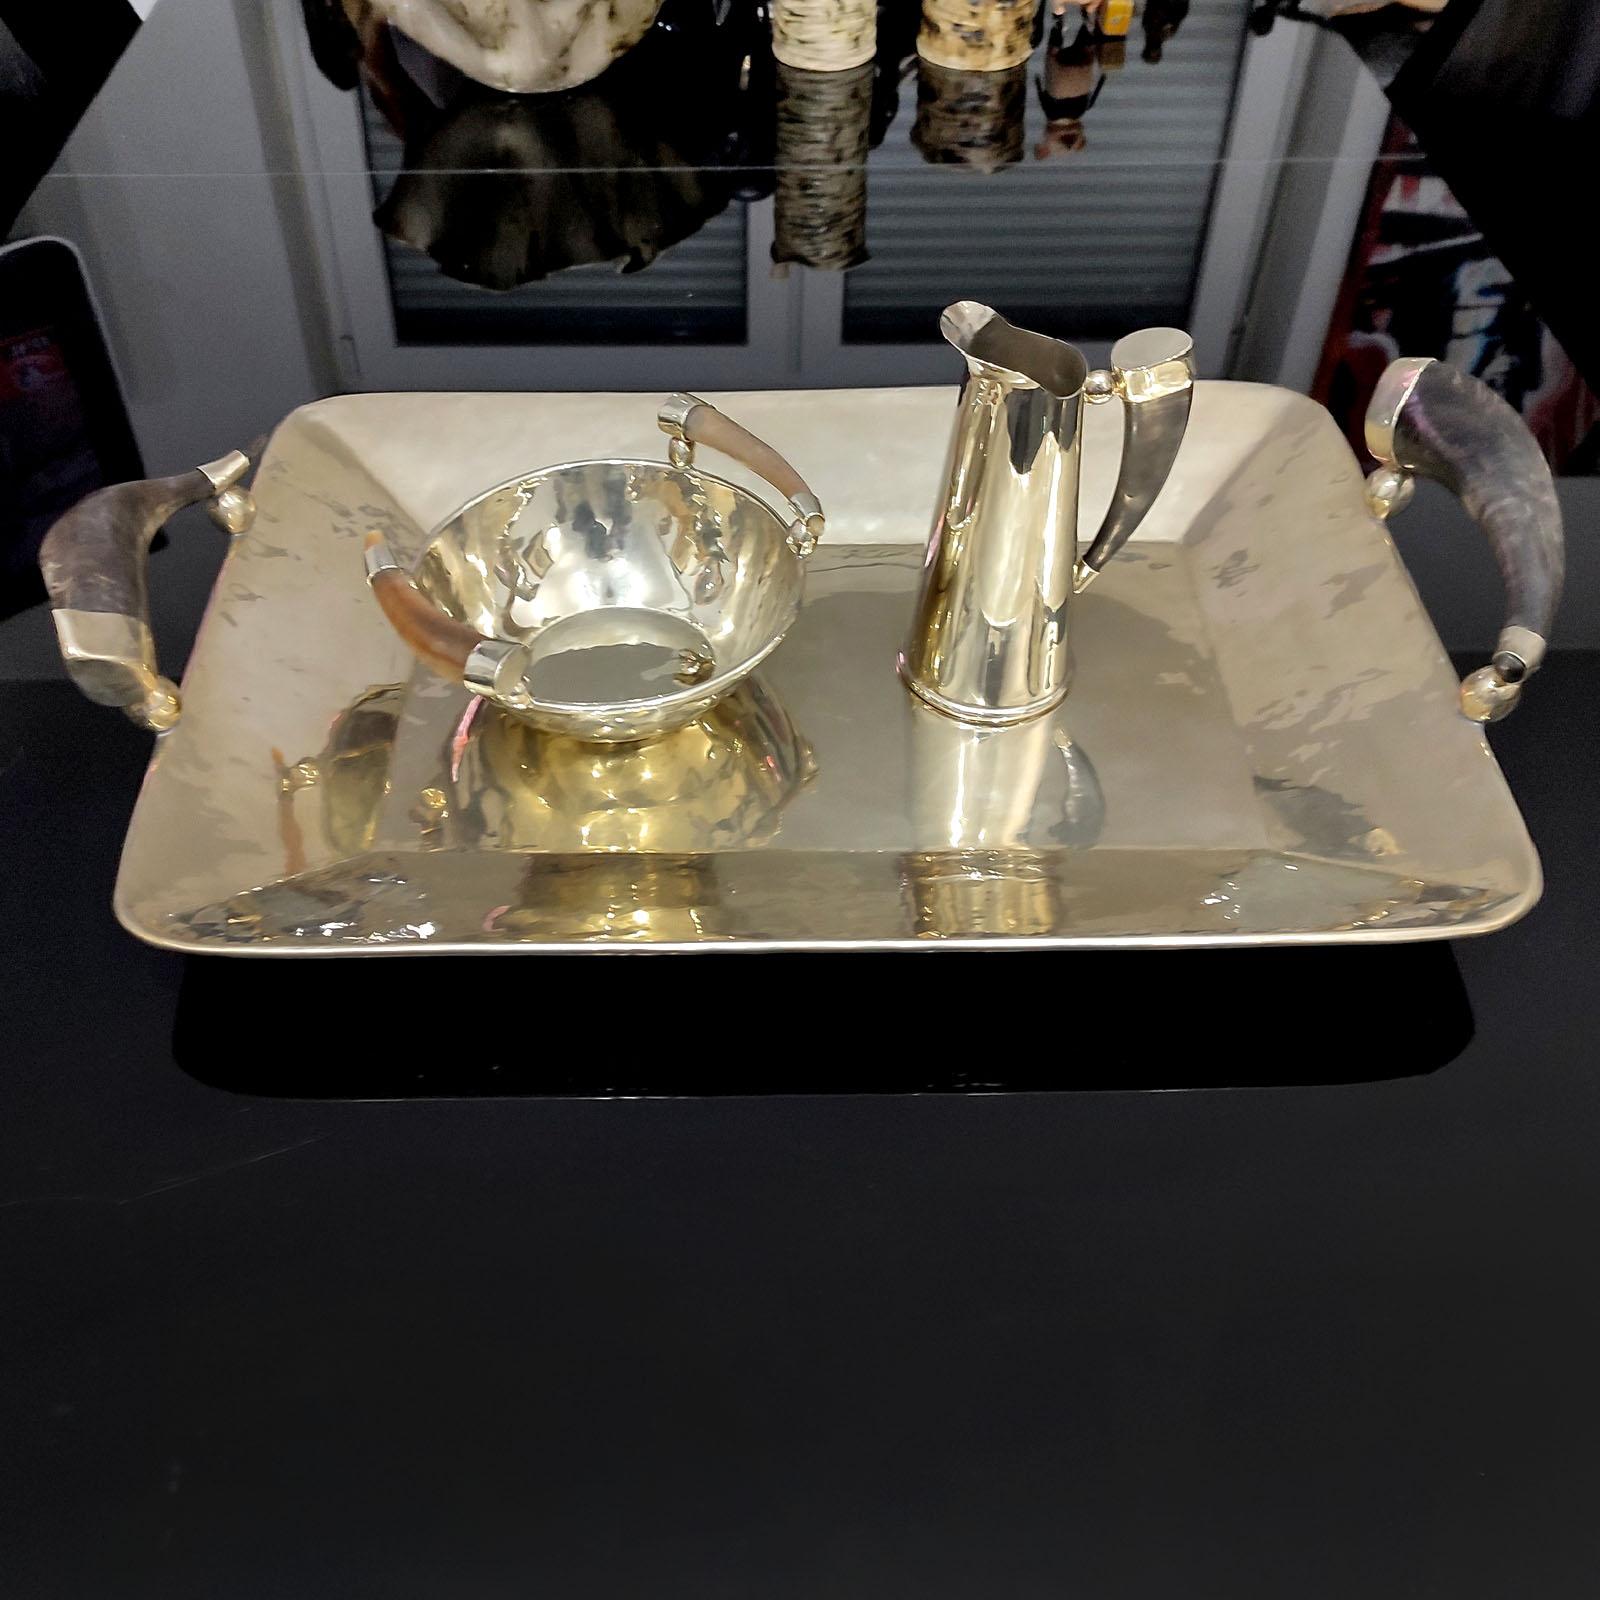 An elegant set of three serving pieces by Airedelsur, JuJuy series, designed by Marcelo Lucini. The set comprises a rectangular tray, a bowl, and a pitcher.
Sophisticated and sleek design, this series is crafted from alpaca, an alloy of nickel,